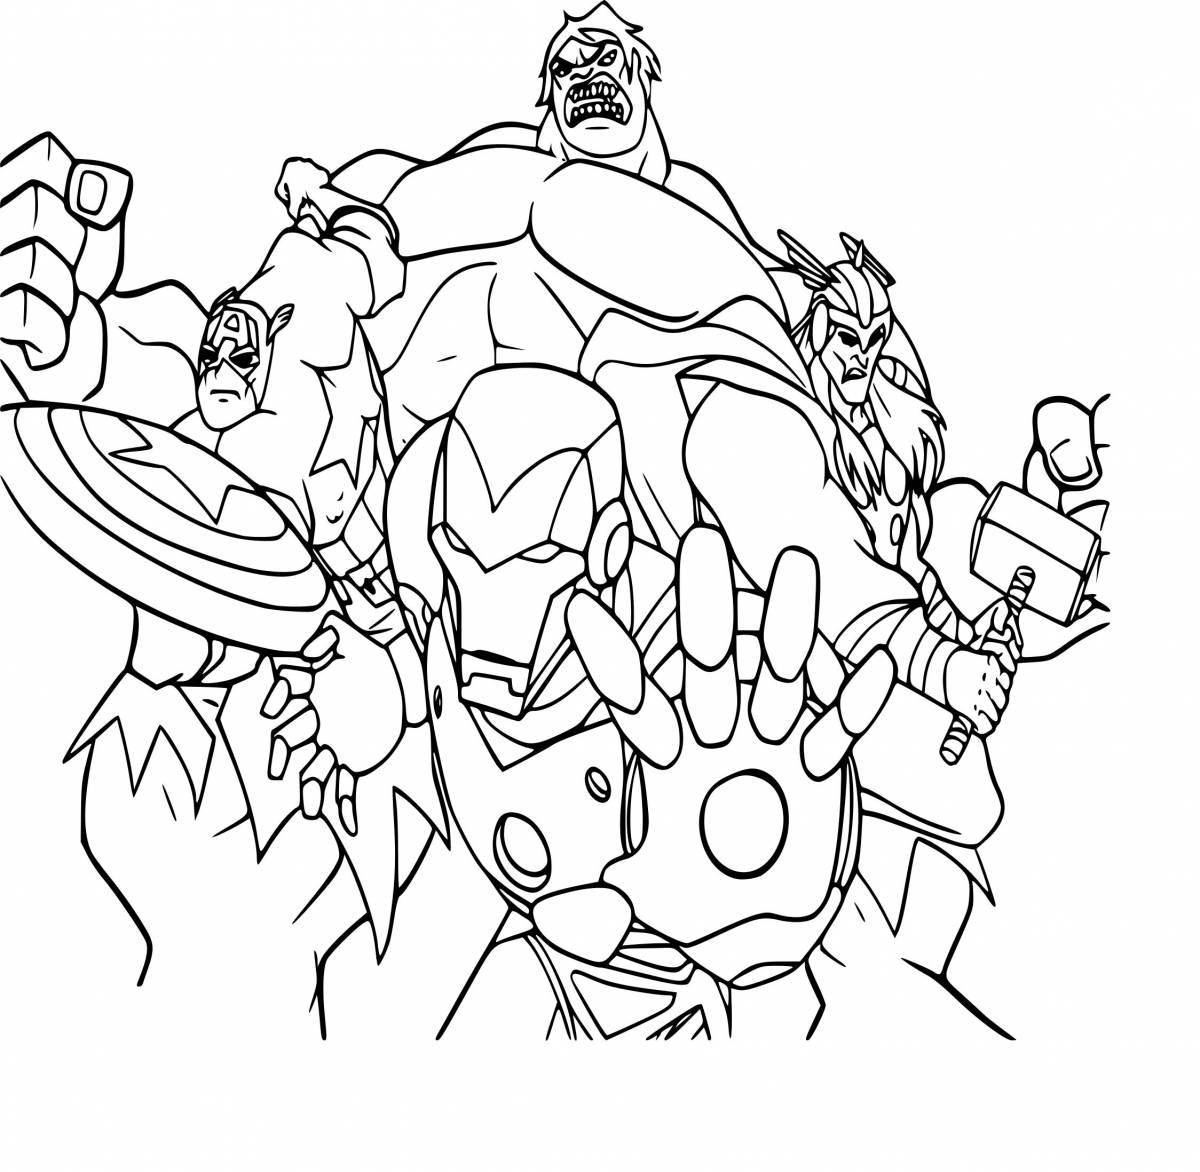 Brave hulk and thor coloring book